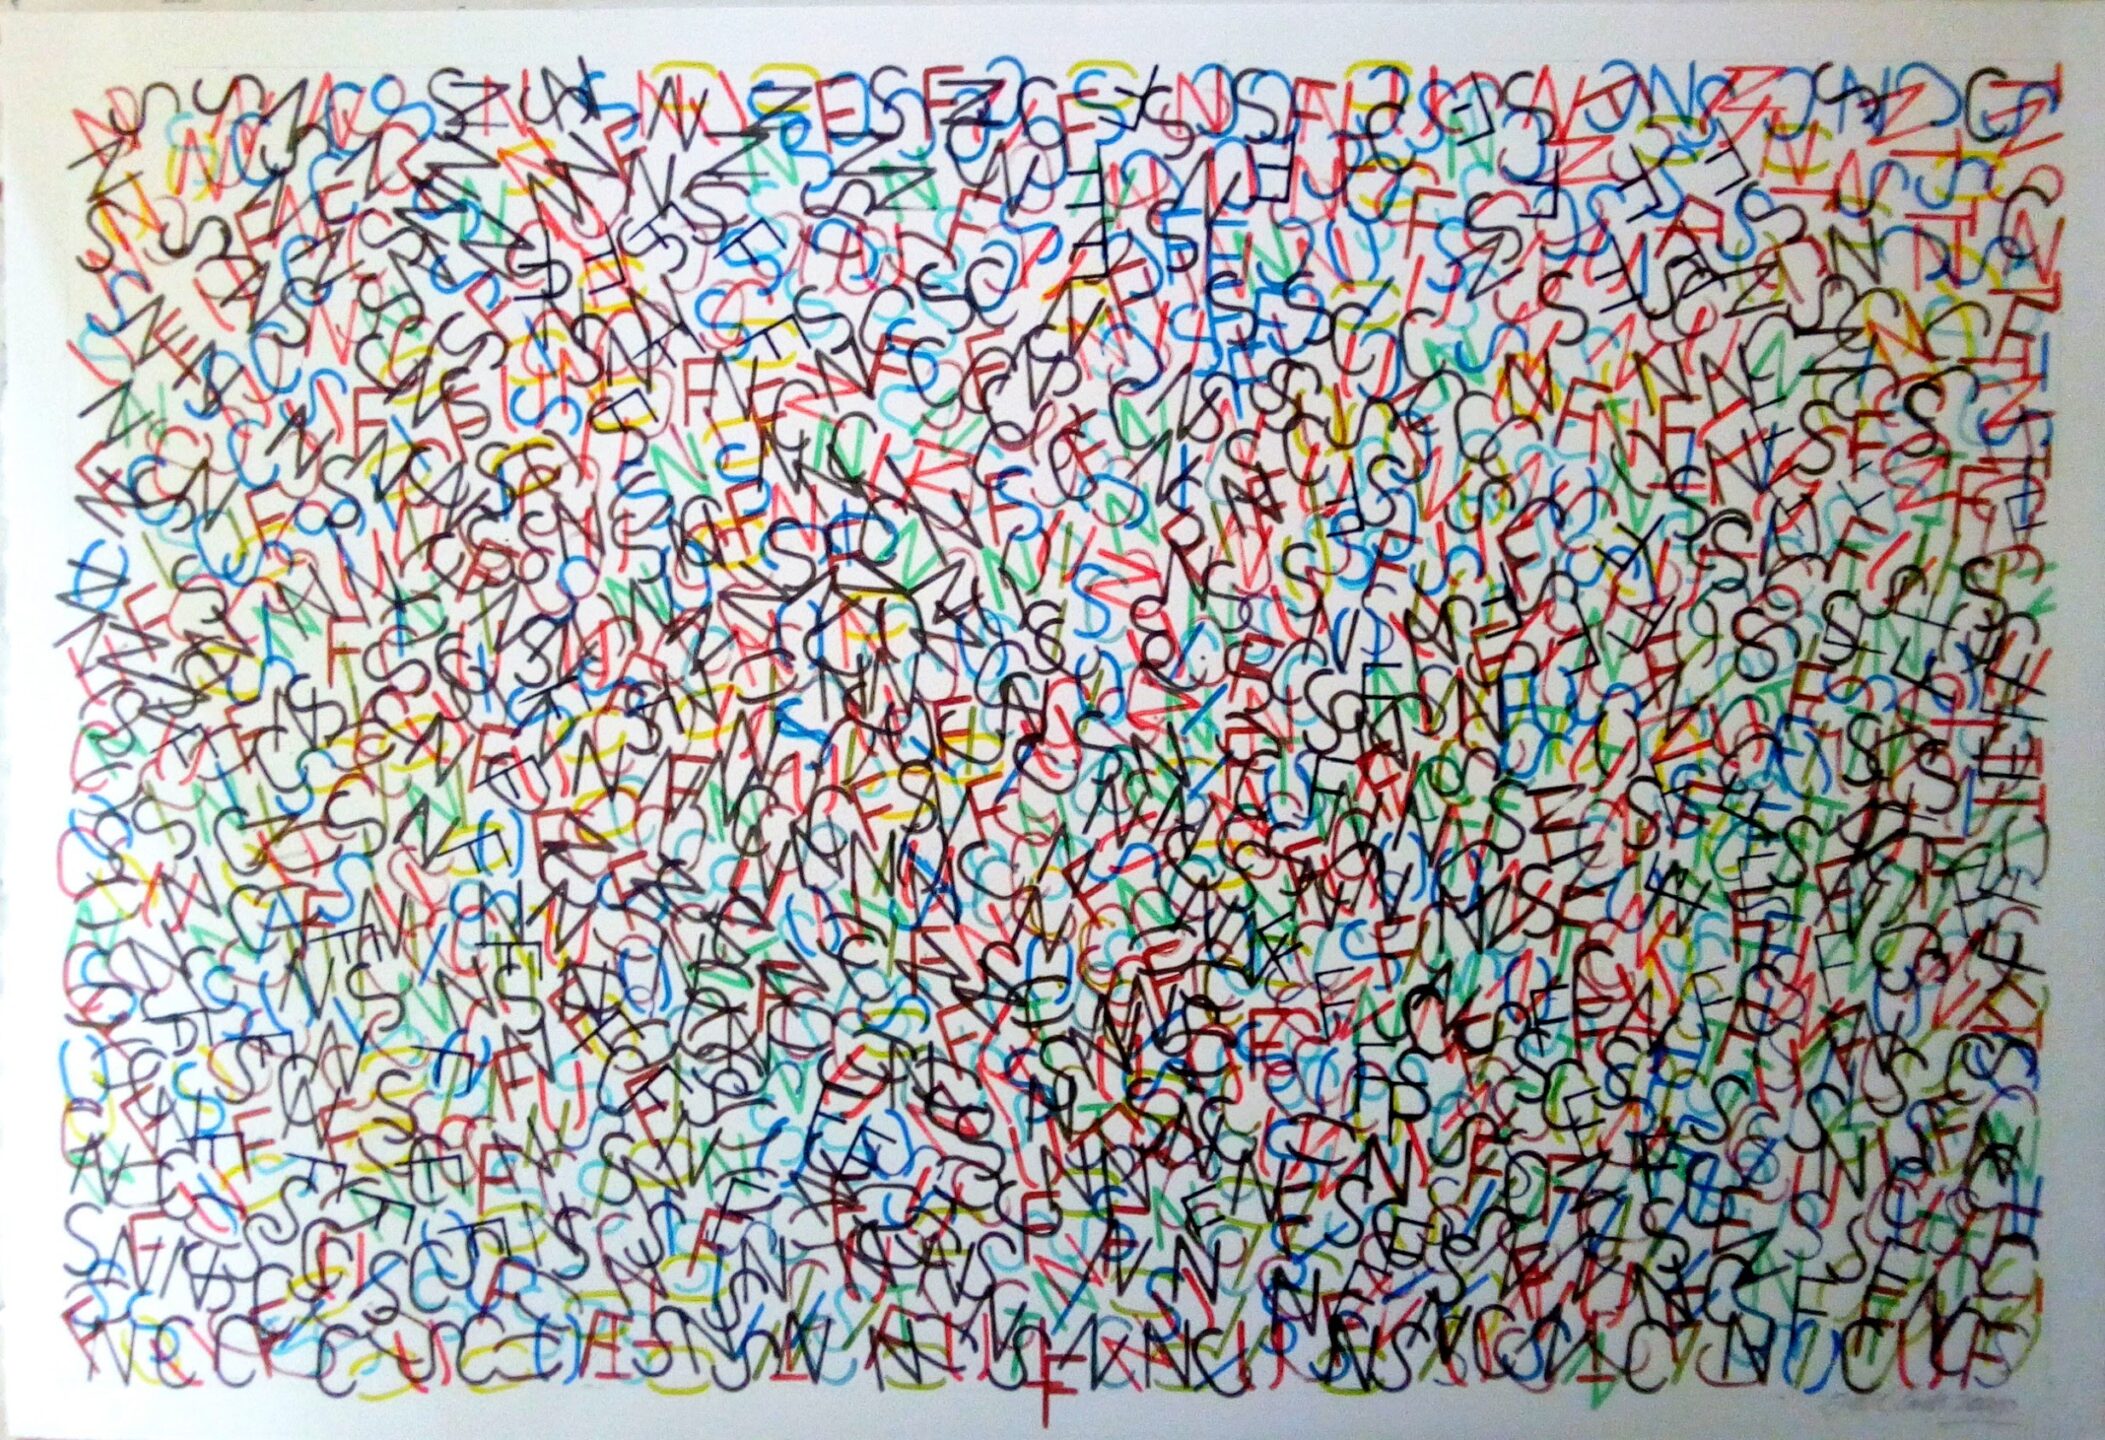 A colourful artwork on white paper created by stencilling words